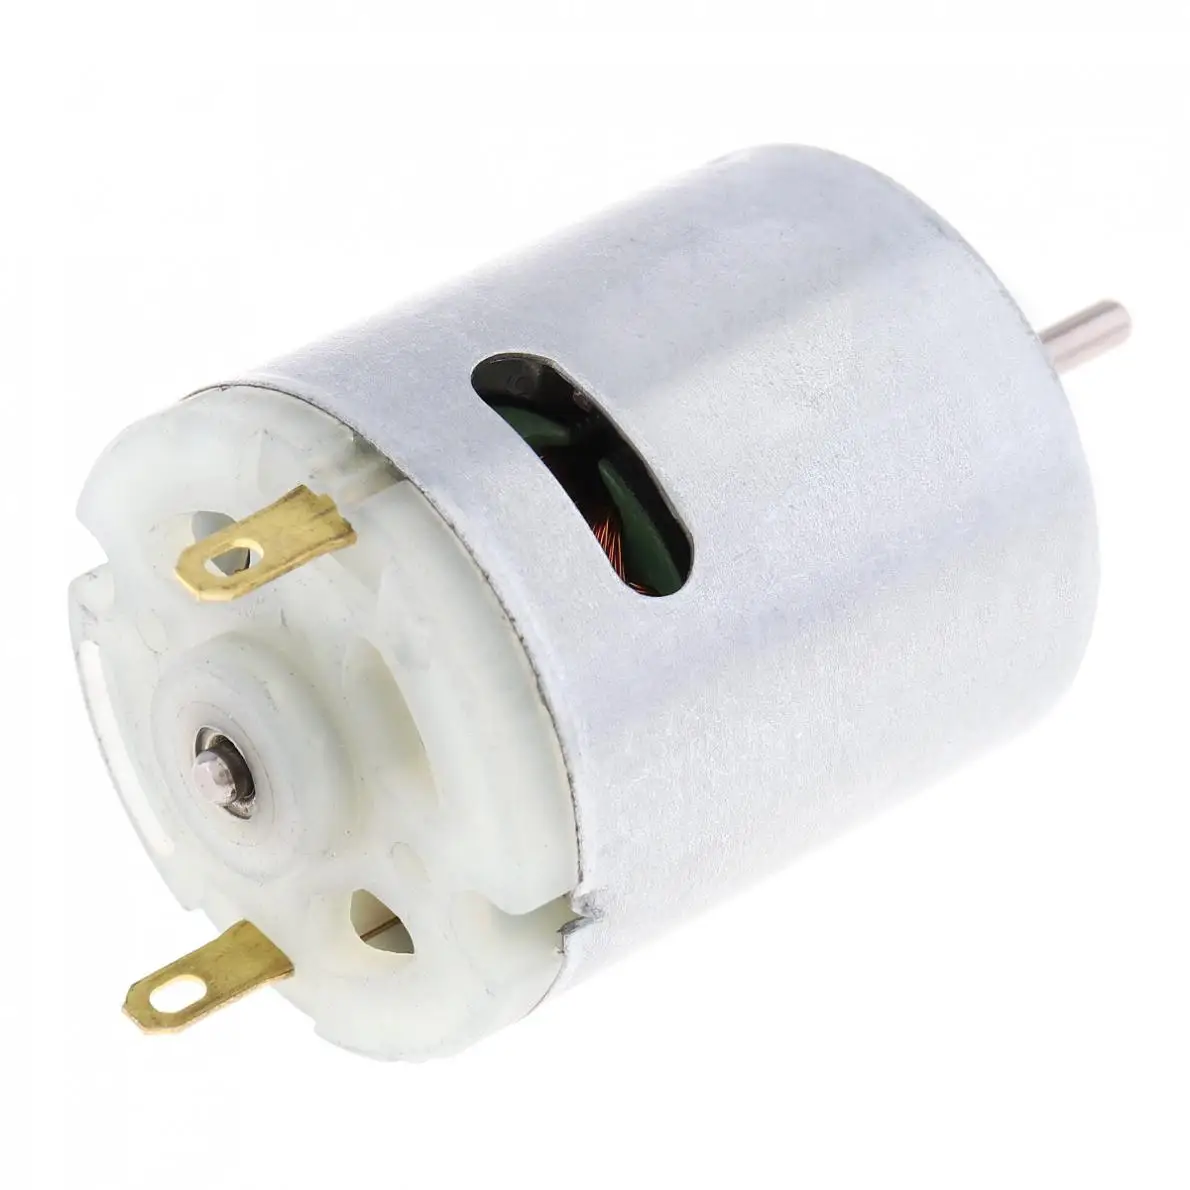 RS365 12V 12800RPM Micro DC Motor Electric Motor for electric fan Car Toy Repair 